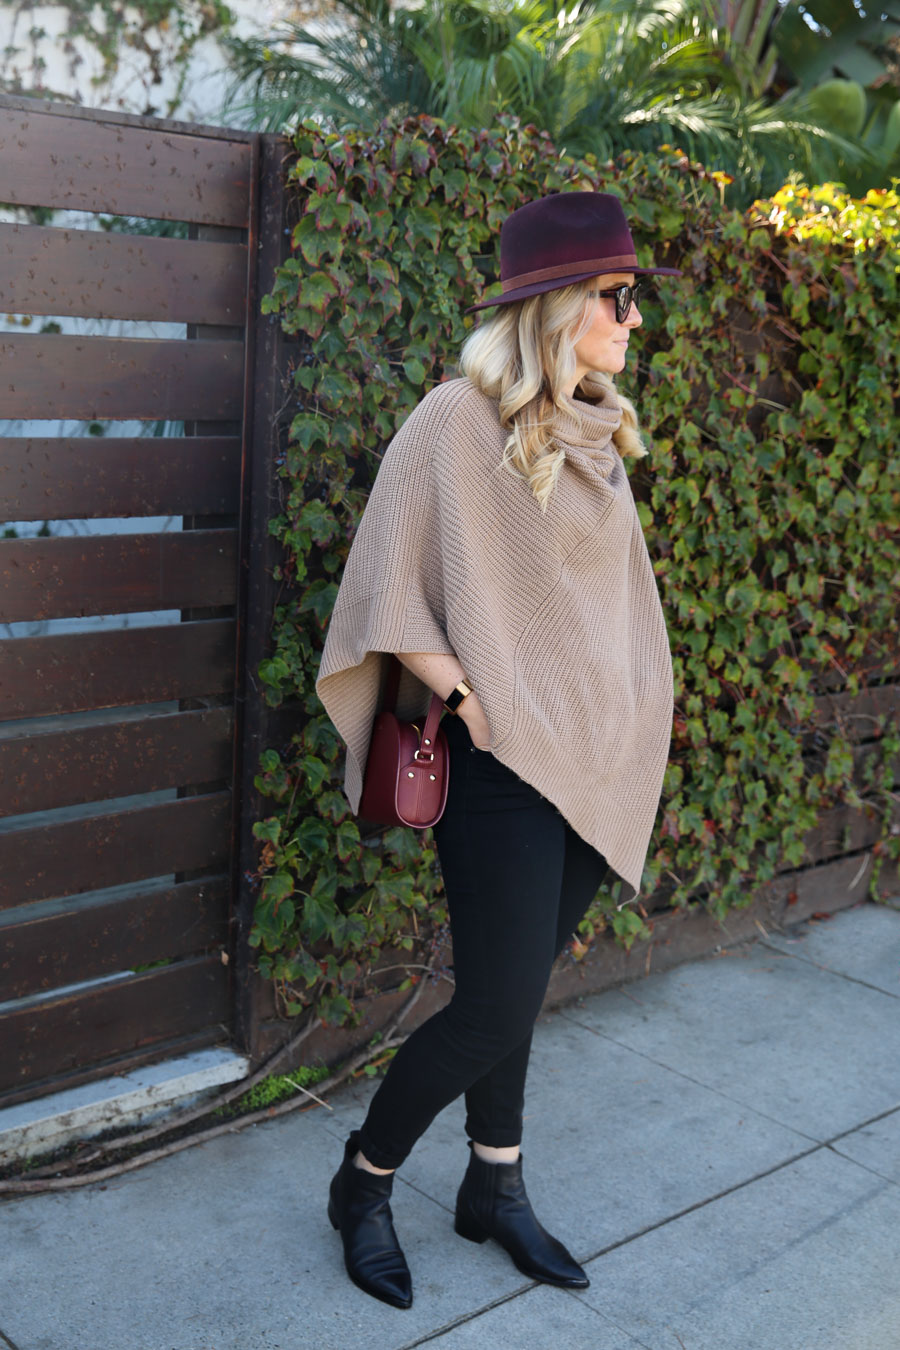 KNowing Your Style - Skinny Jeans & Poncho